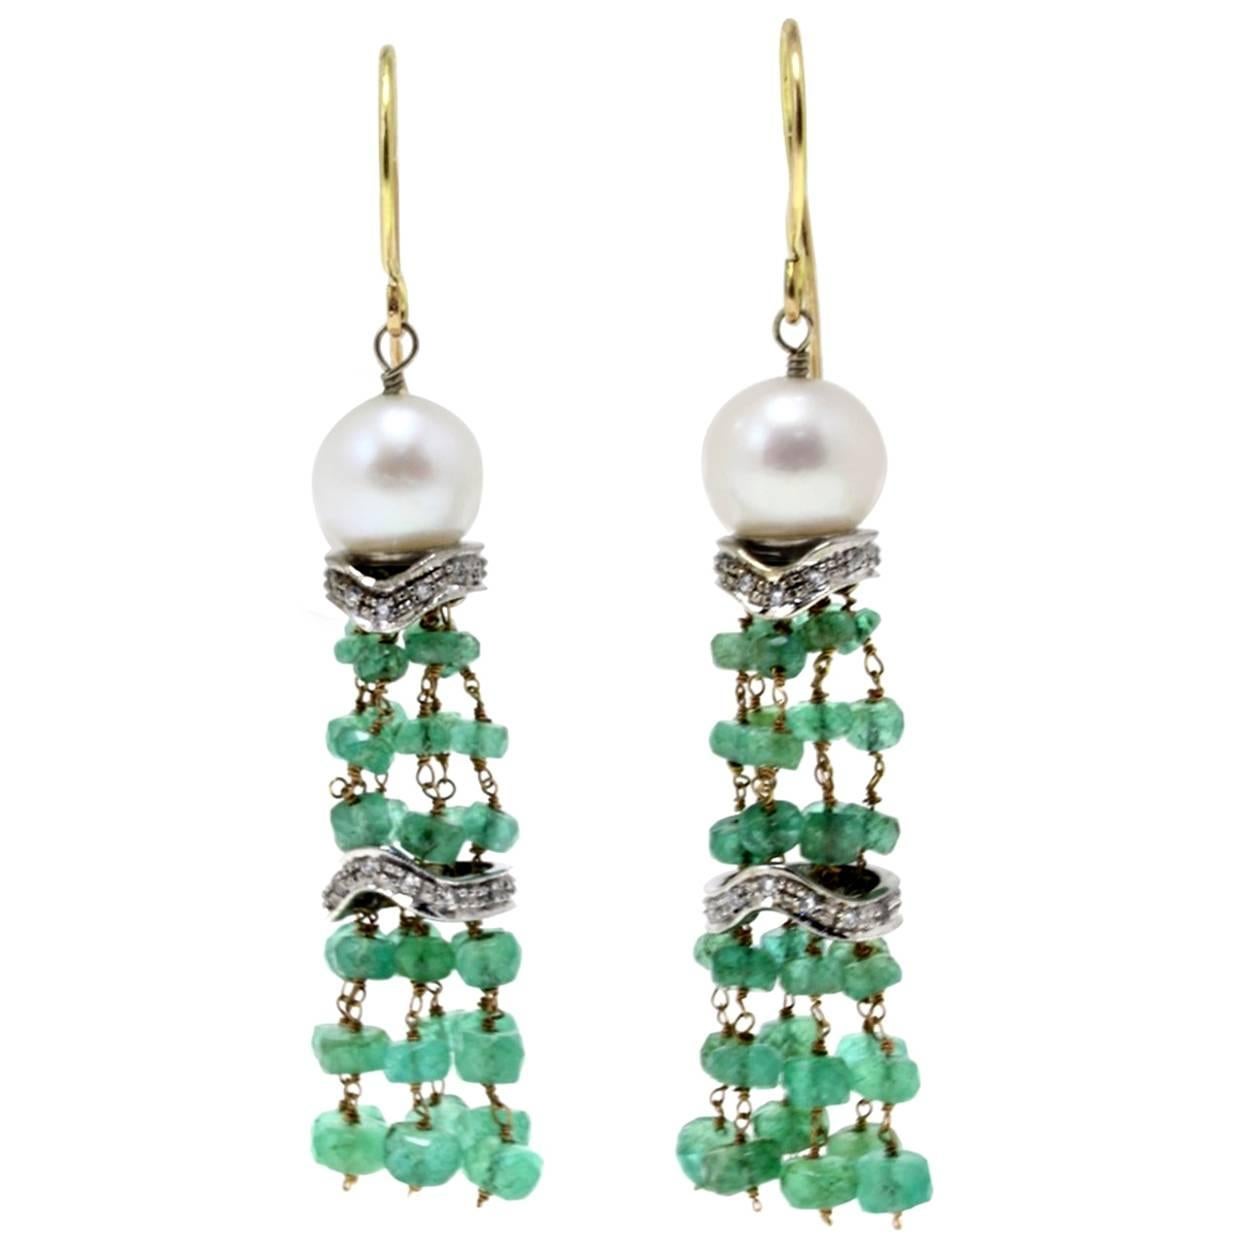 0.53 ct Diamonds, 27.50 ct Emeralds 3.4 g Pearls White, Rose Gold Dangle Earring For Sale